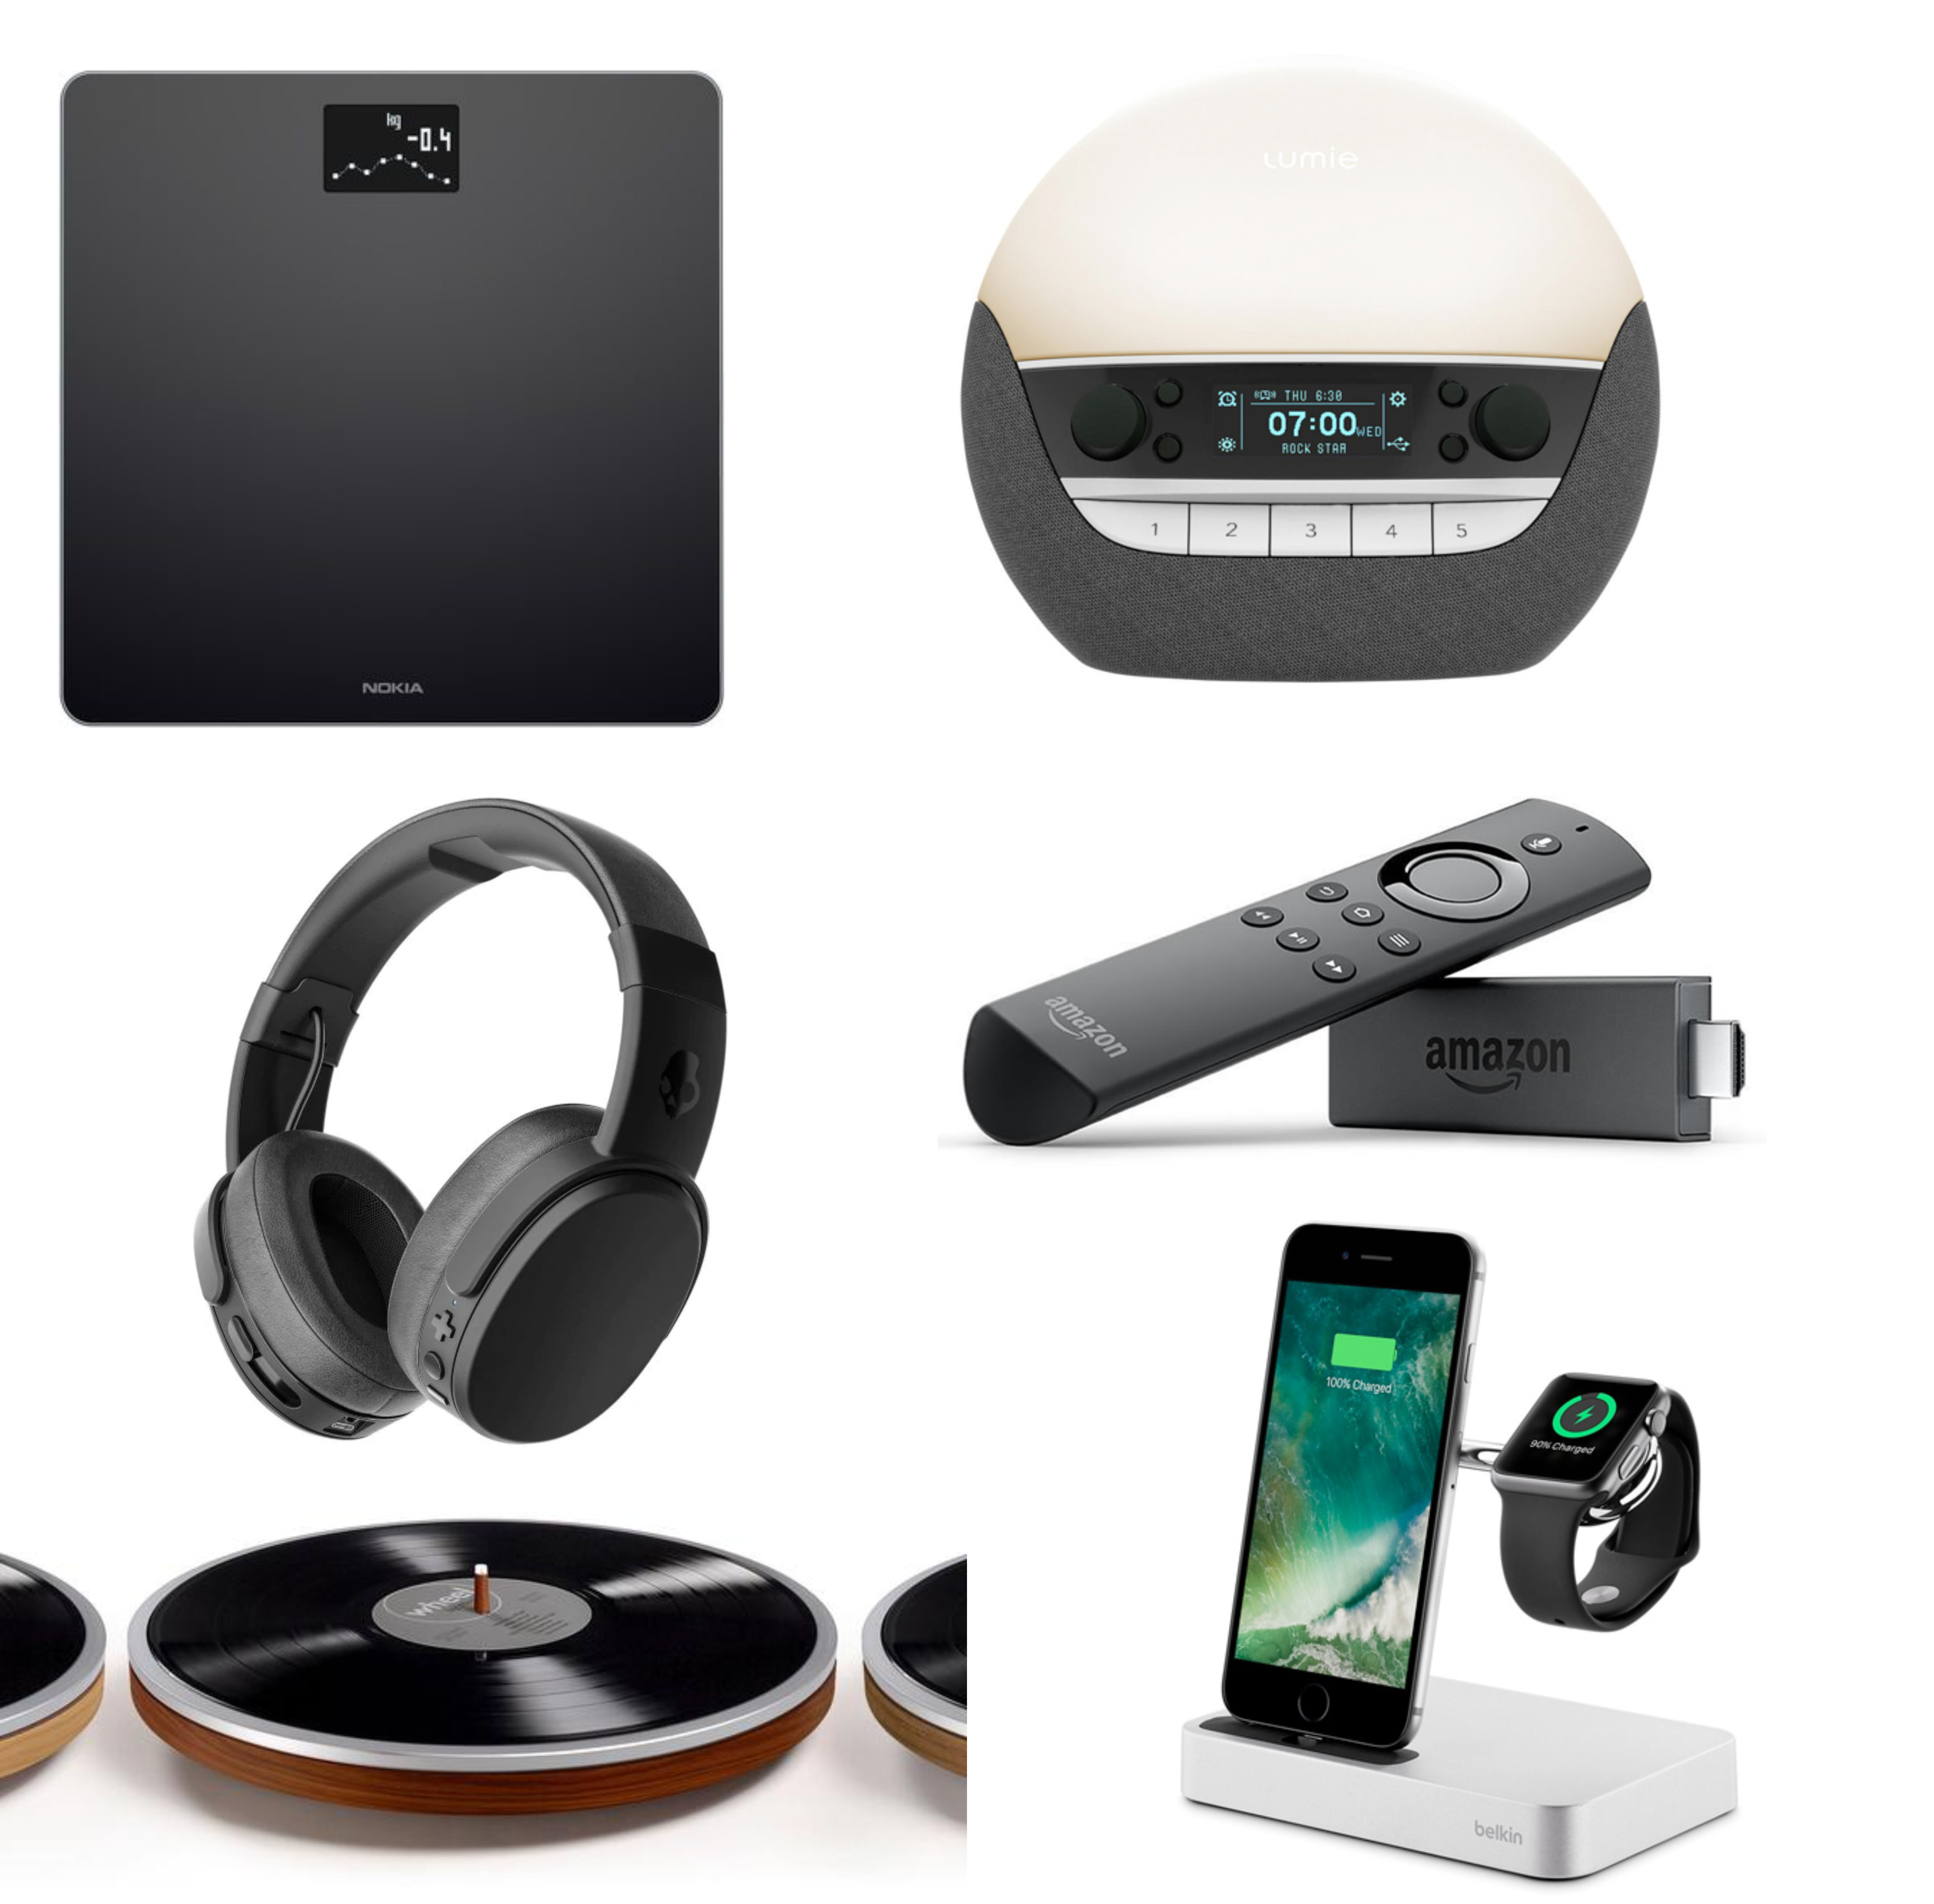 PAUSE Picks: The Gadgets to Buy This Week